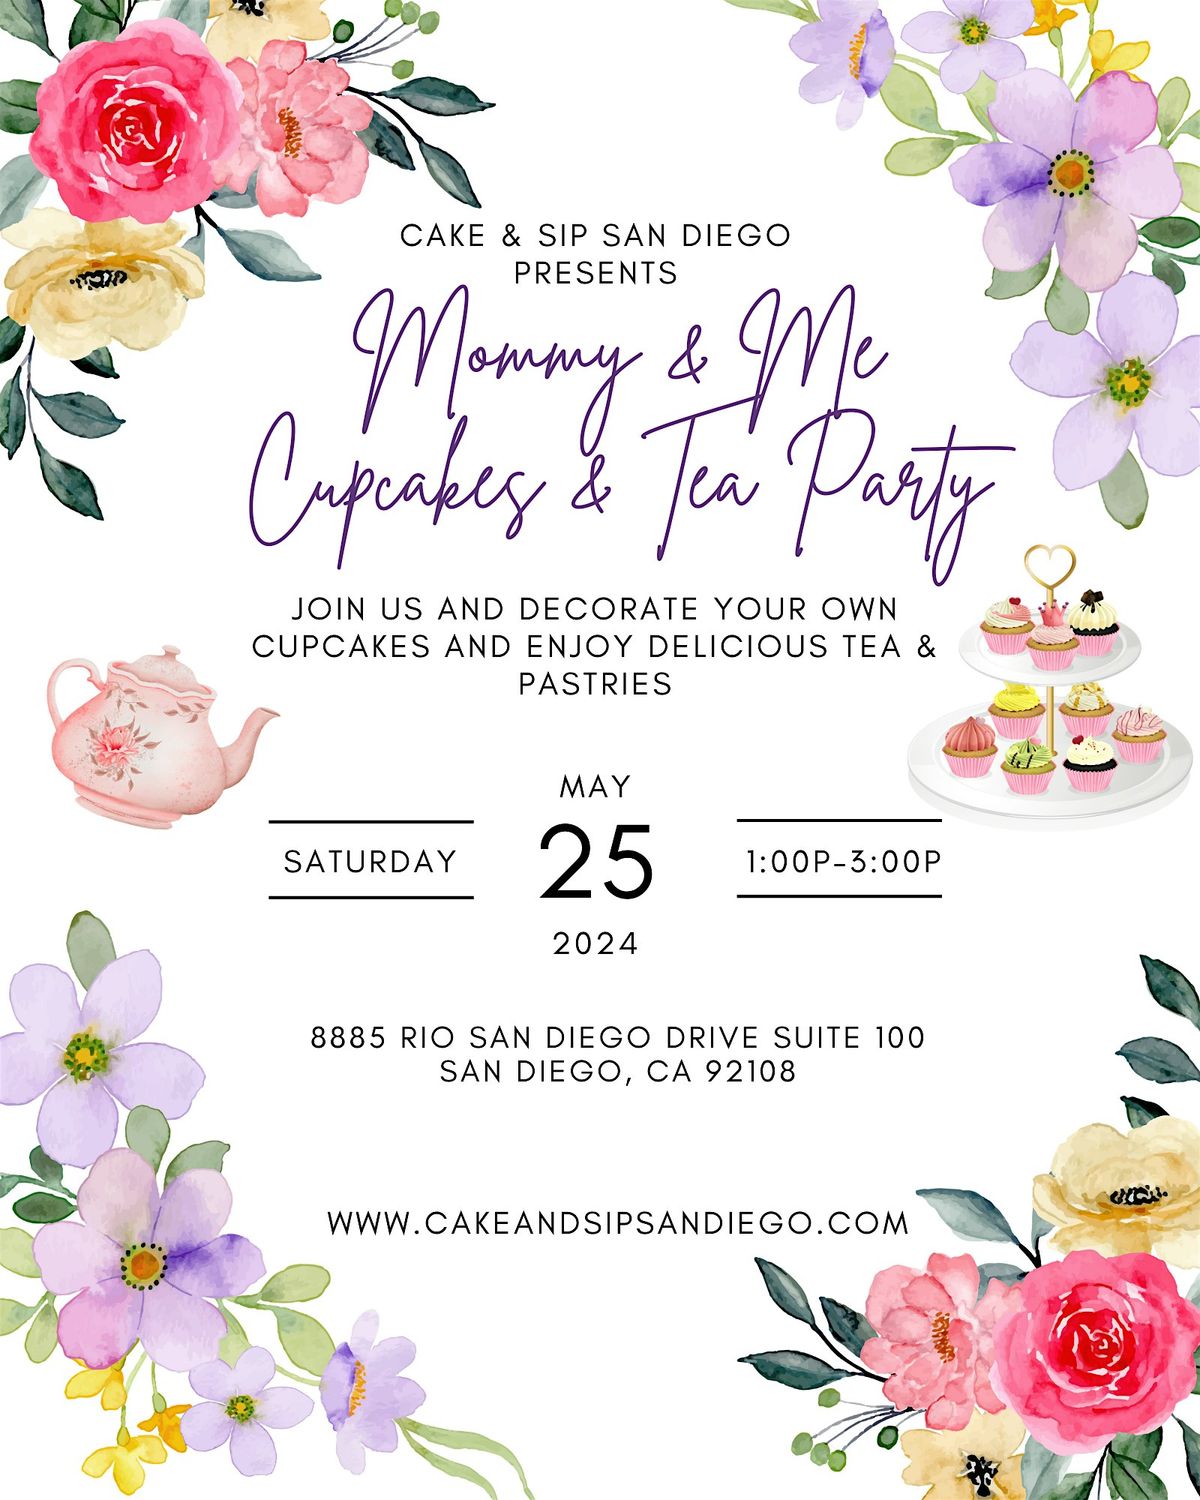 Cake and Sip San Diego "Mommy & Me Cupcake Decorating & Tea Party"